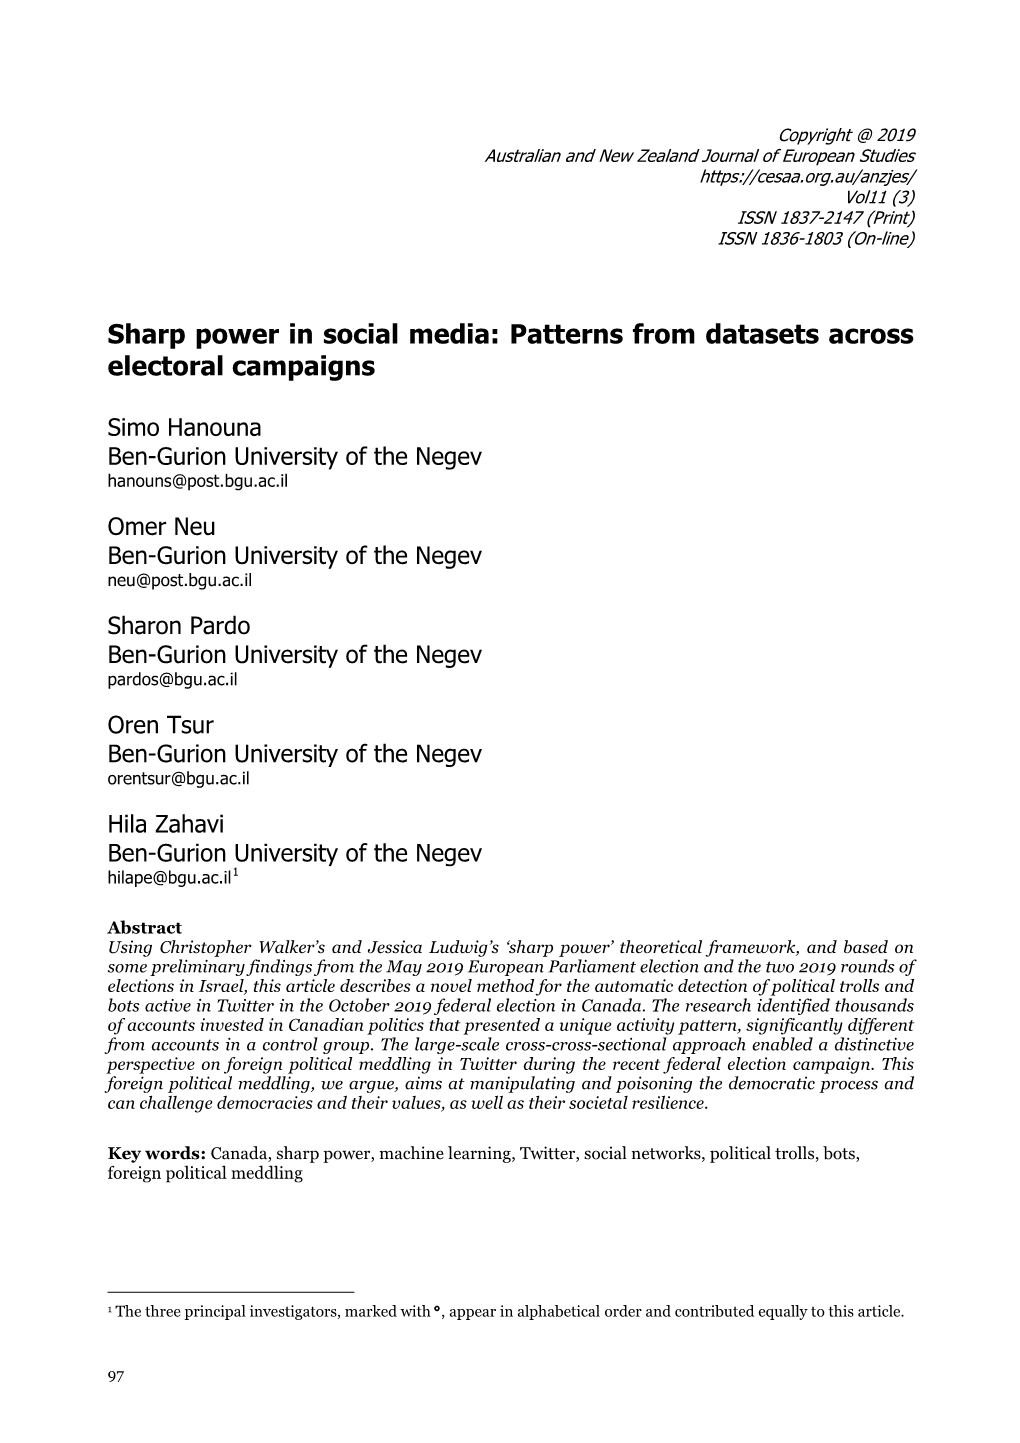 Sharp Power in Social Media: Patterns from Datasets Across Electoral Campaigns